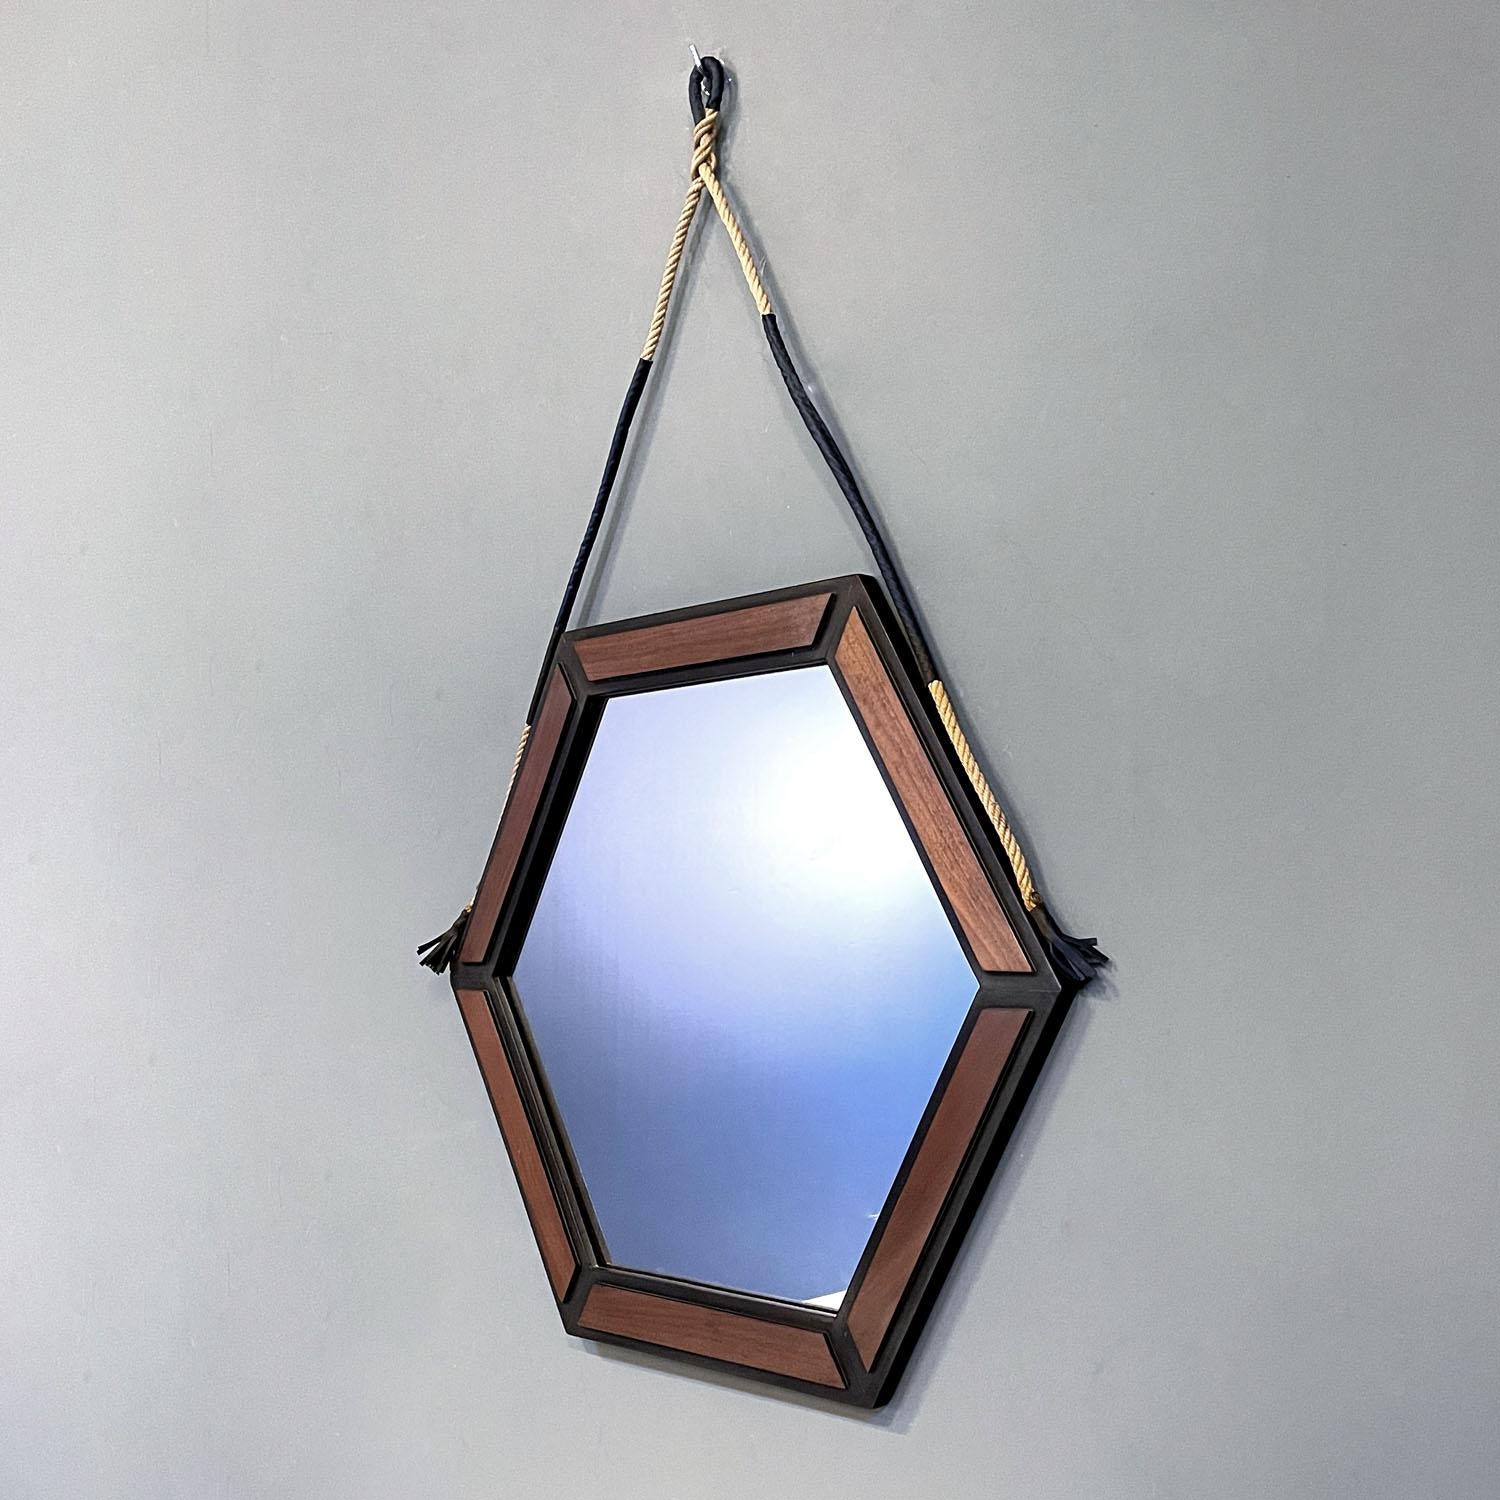 Italian mid-century modern hexagonal wooden wall mirror with rope, 1960s In Good Condition For Sale In MIlano, IT